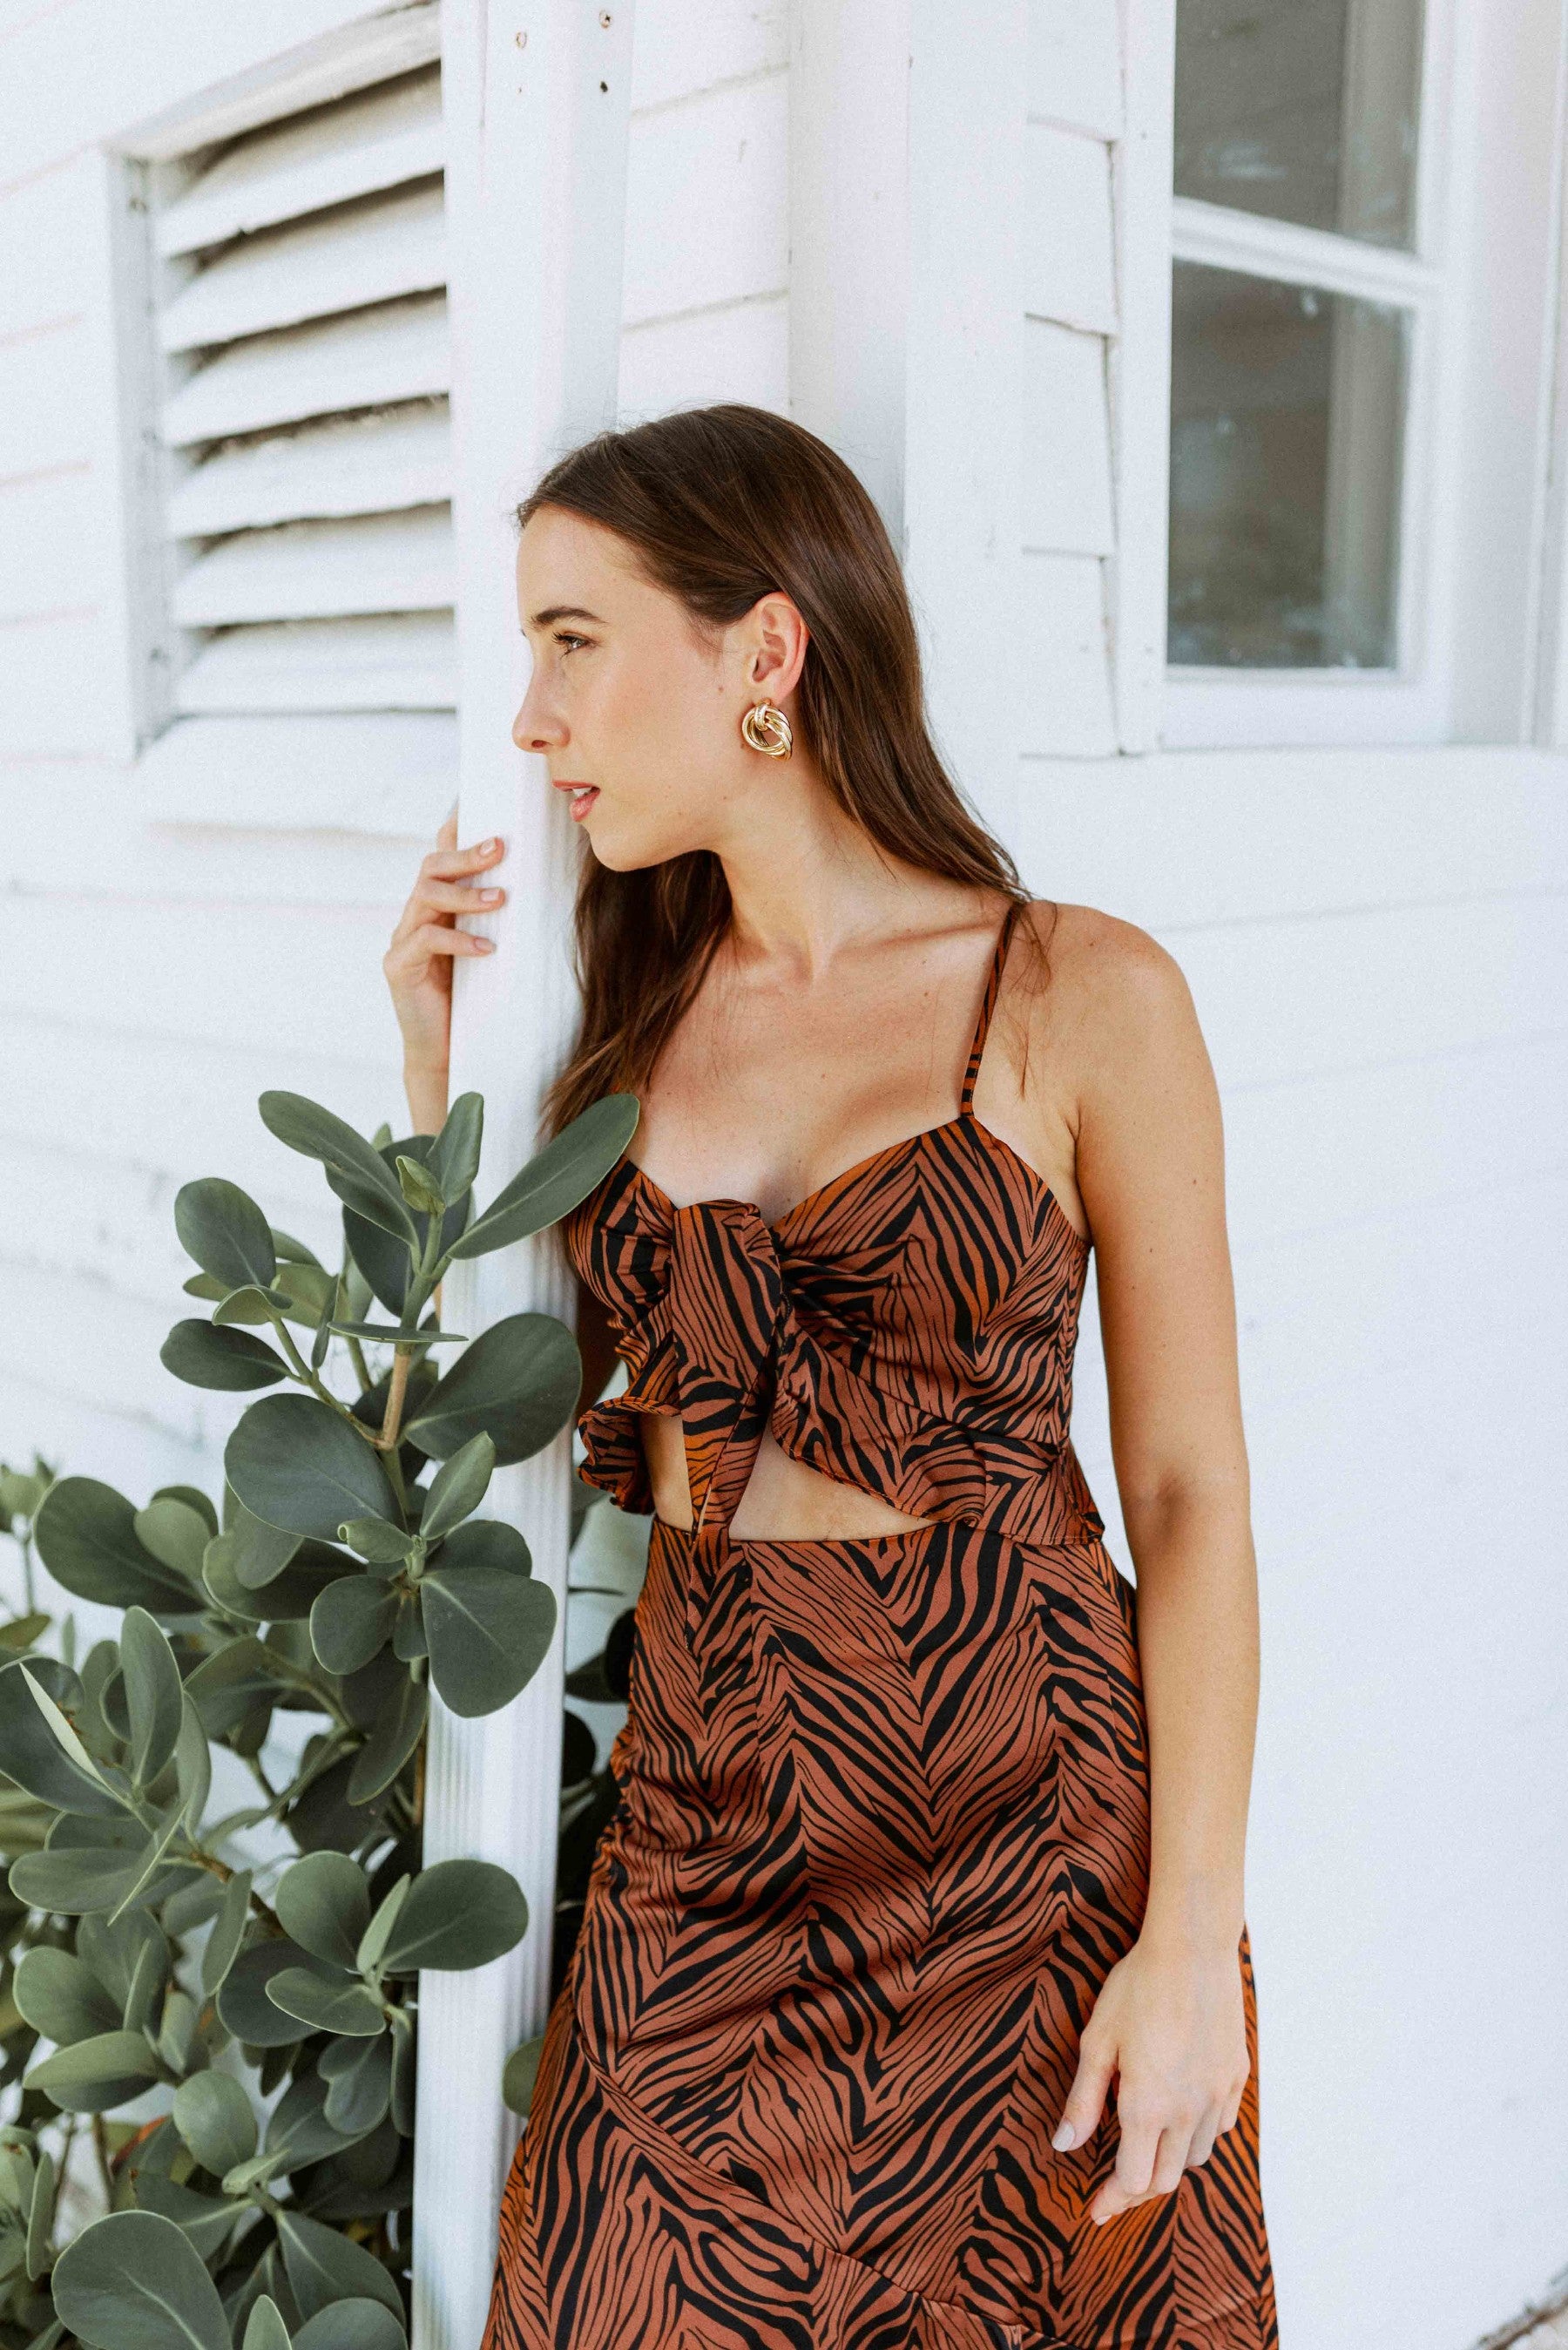 Brunette girl models an animal print maxi skirt set in brown and black. The matching maxi skirt set comes with a spaghetti strap crop top and long, flowy maxi skirt.